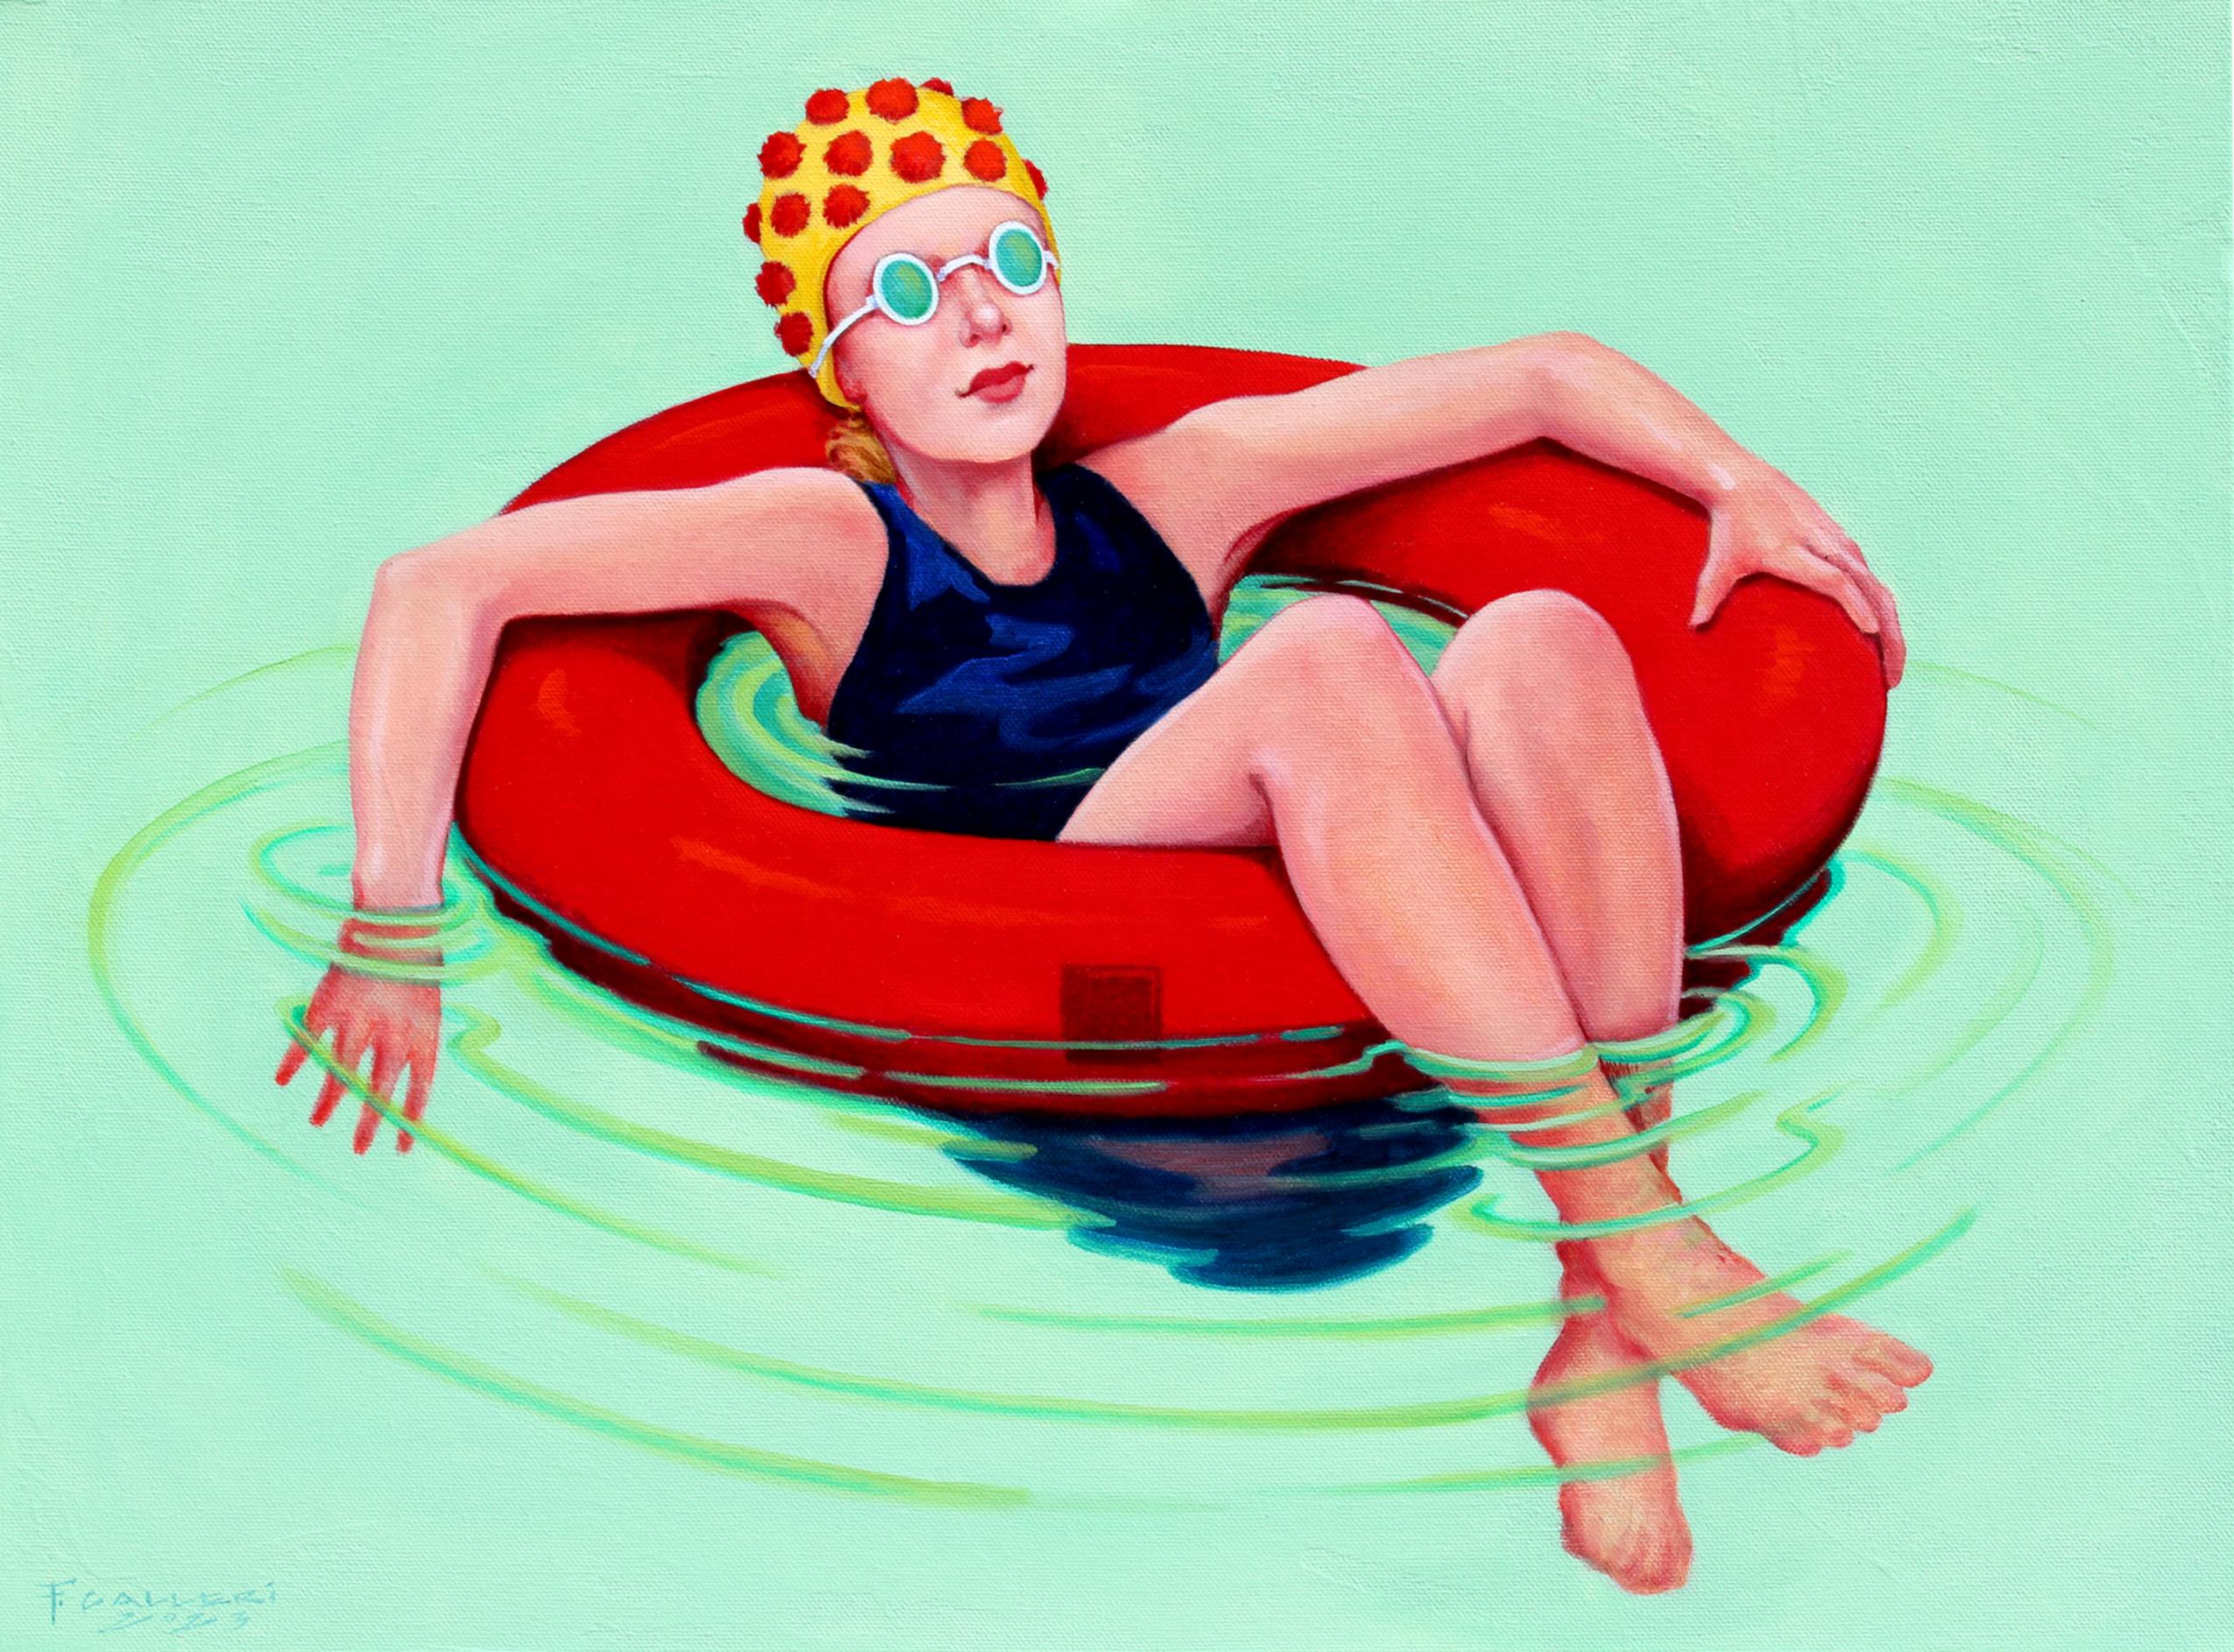 Fred Calleri Figurative Painting - "Jelly Doughnut" oil painting of a woman floating in a red tube in green water